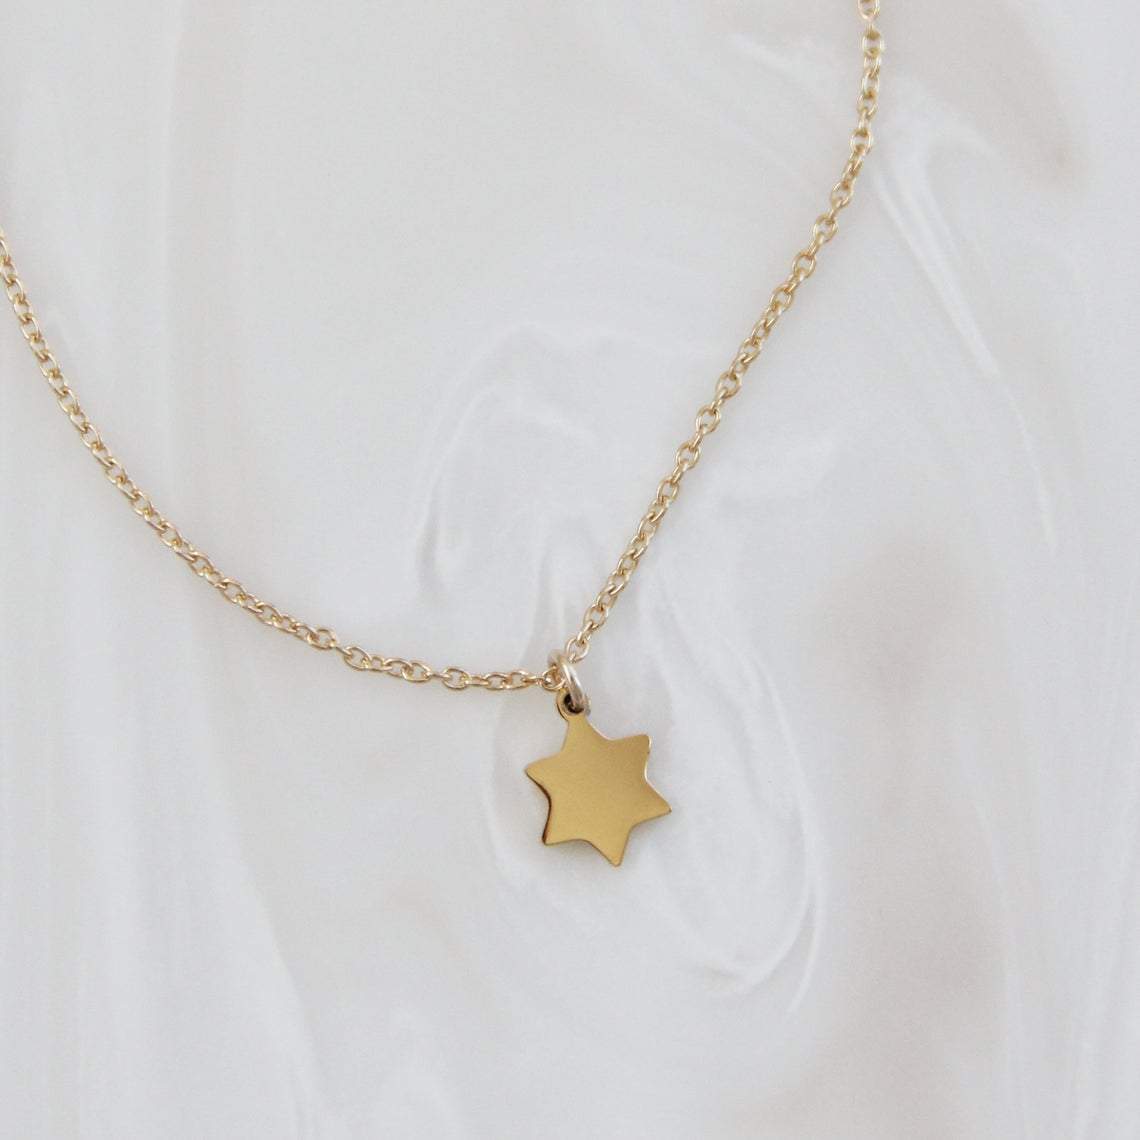 Maive Necklaces Sterling Silver Tiny Star of David Necklace - Gold or Silver